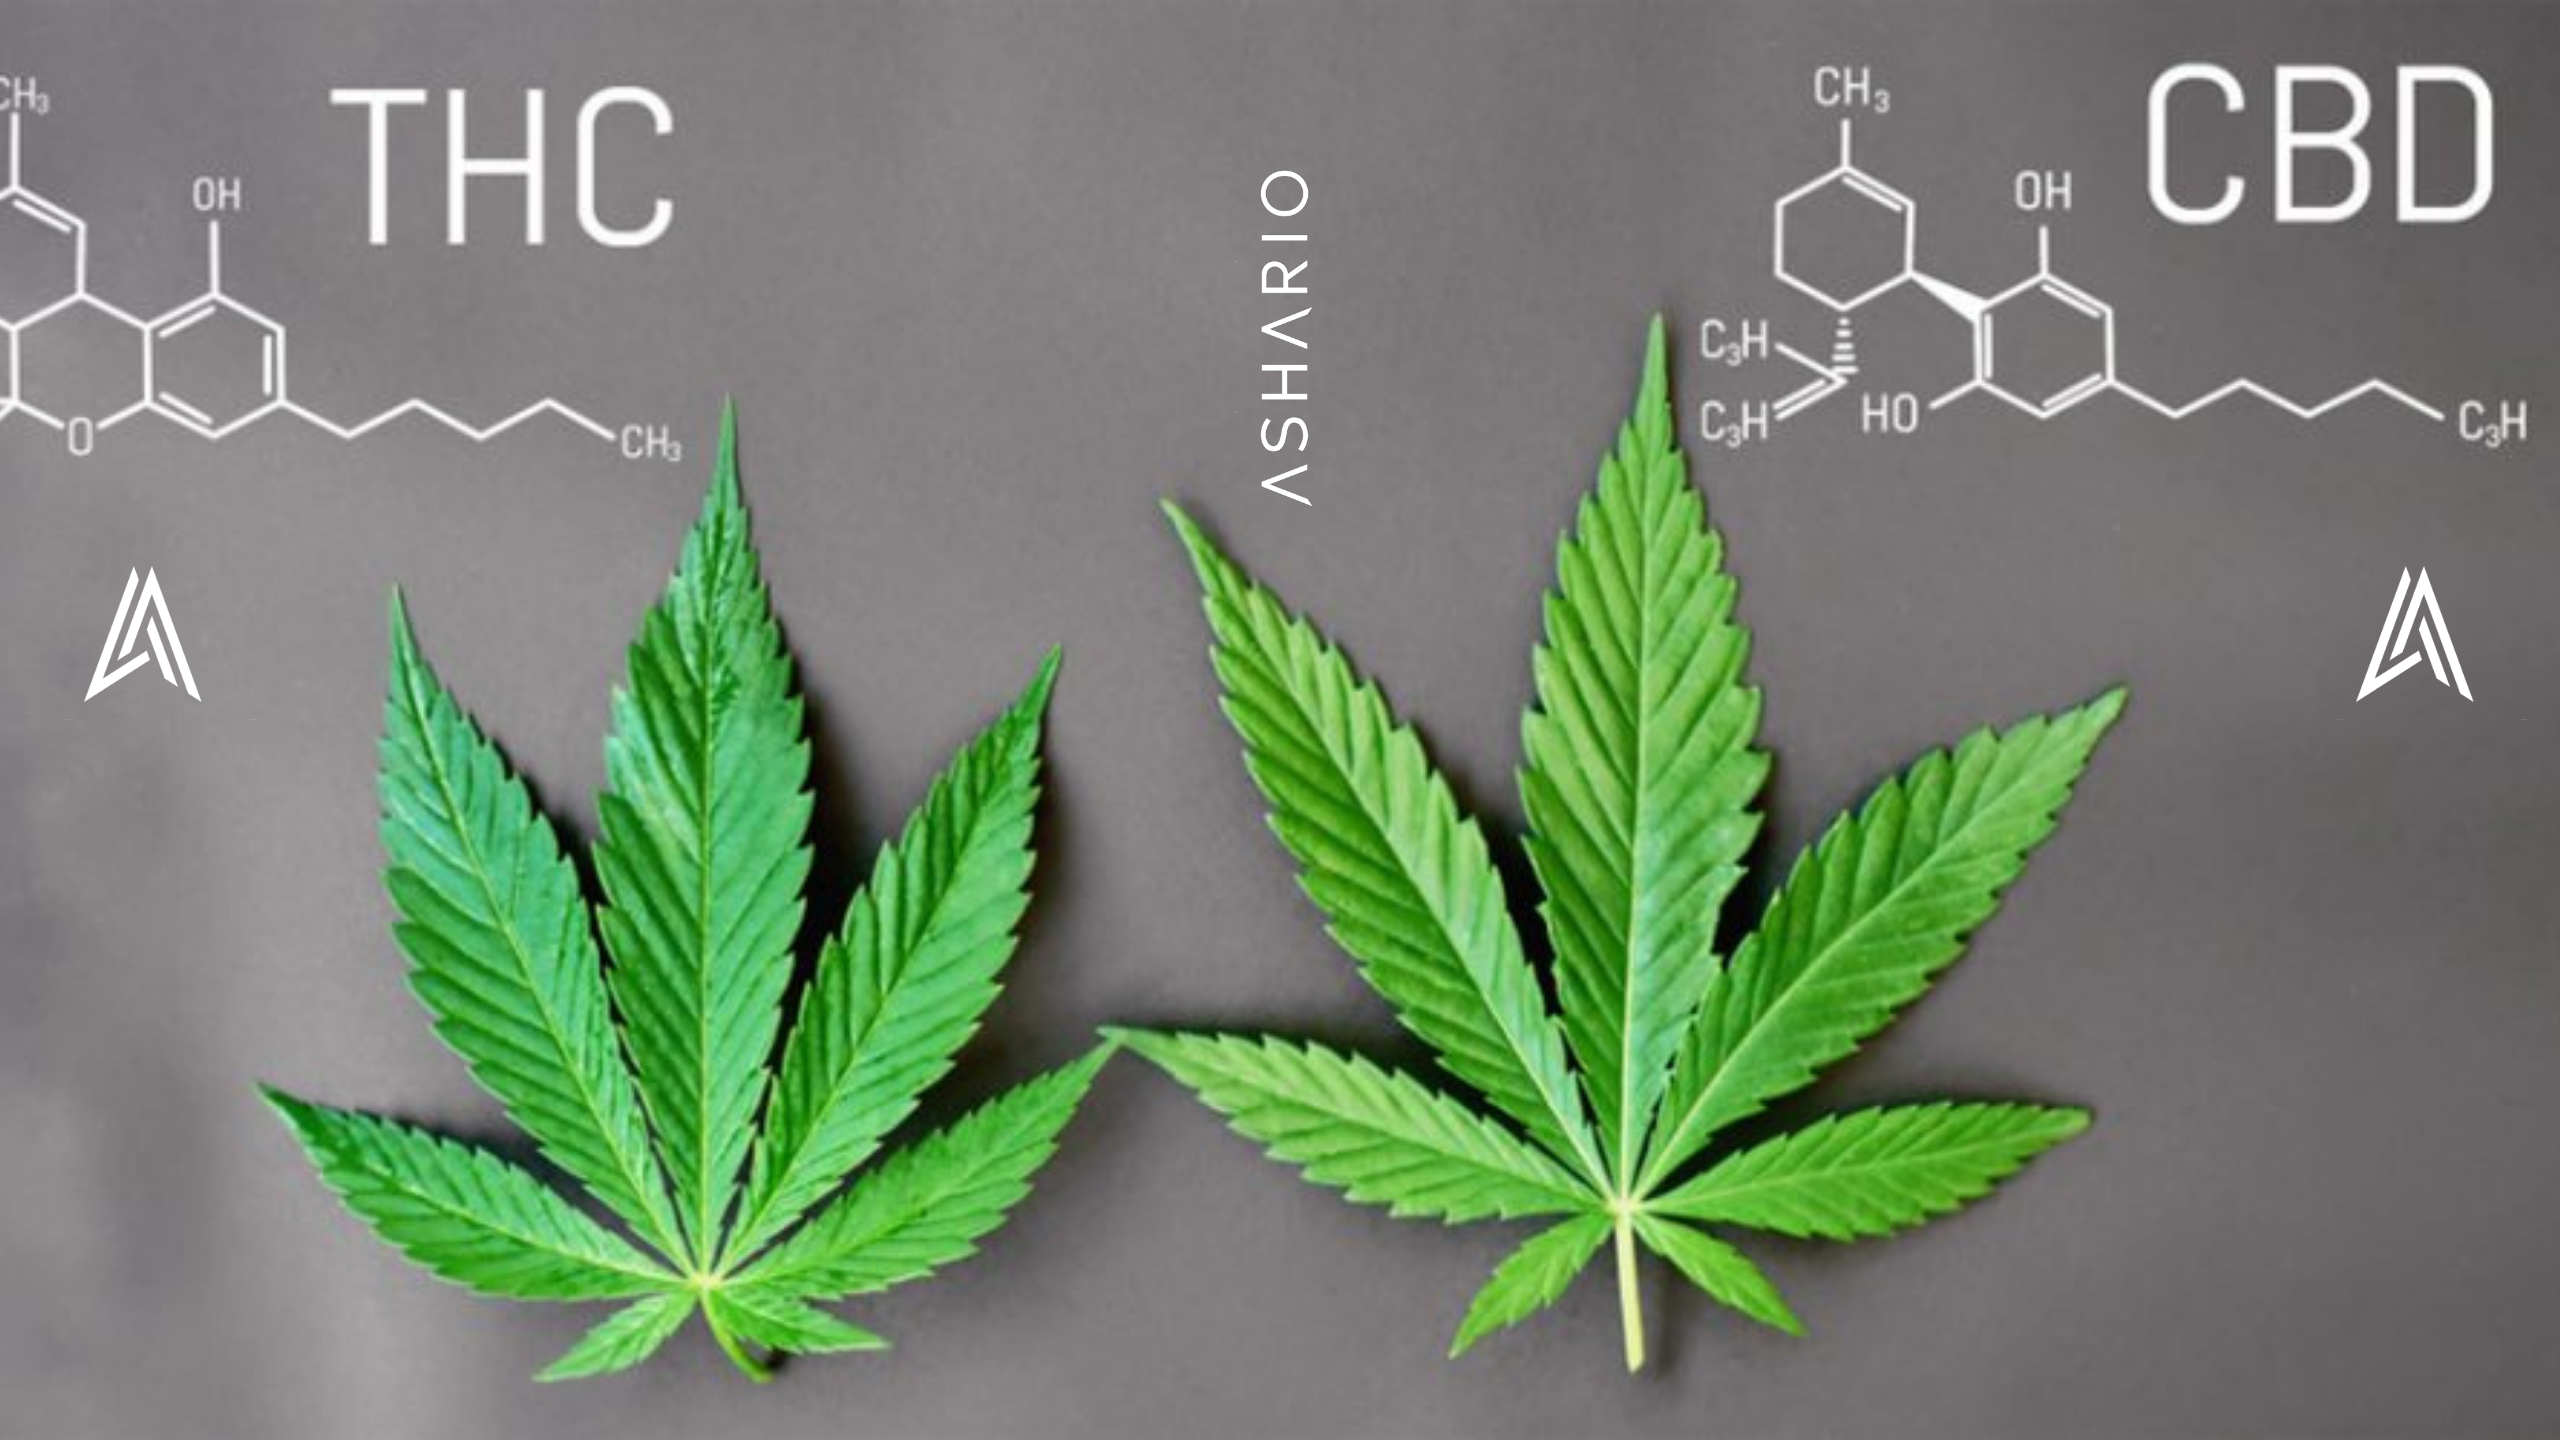 Embark on a journey through the world of cannabis with Ashario Cannabis as we explore the differences between THC and CBD.